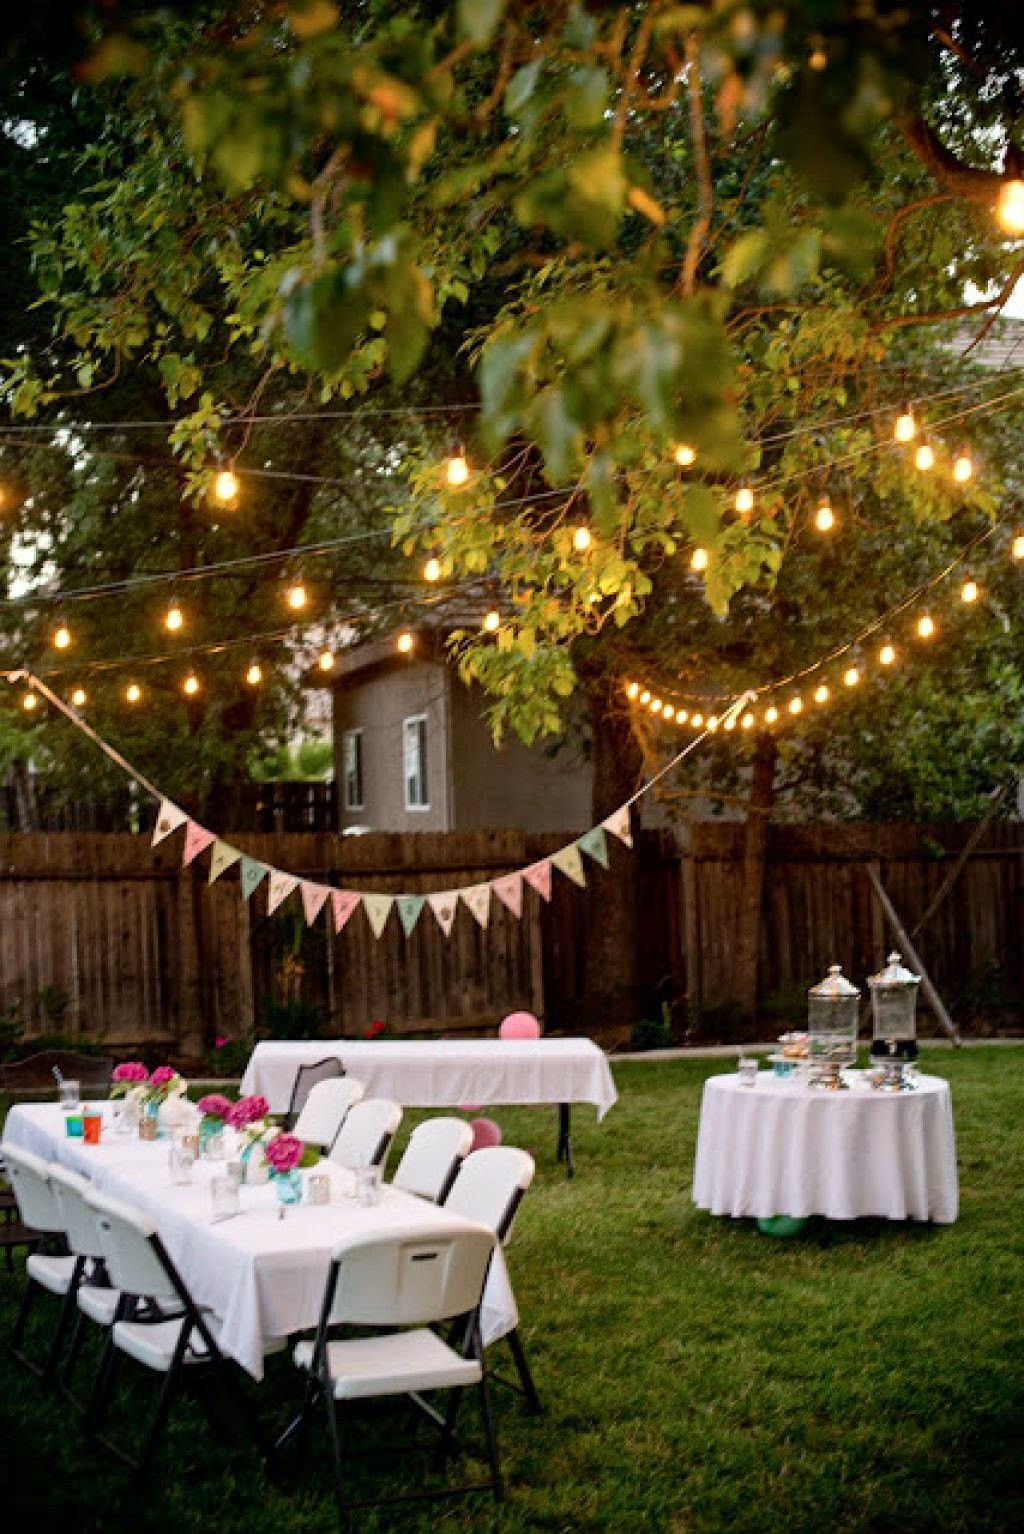 Ideas For Backyard Party
 Enjoy a year end party in the backyard